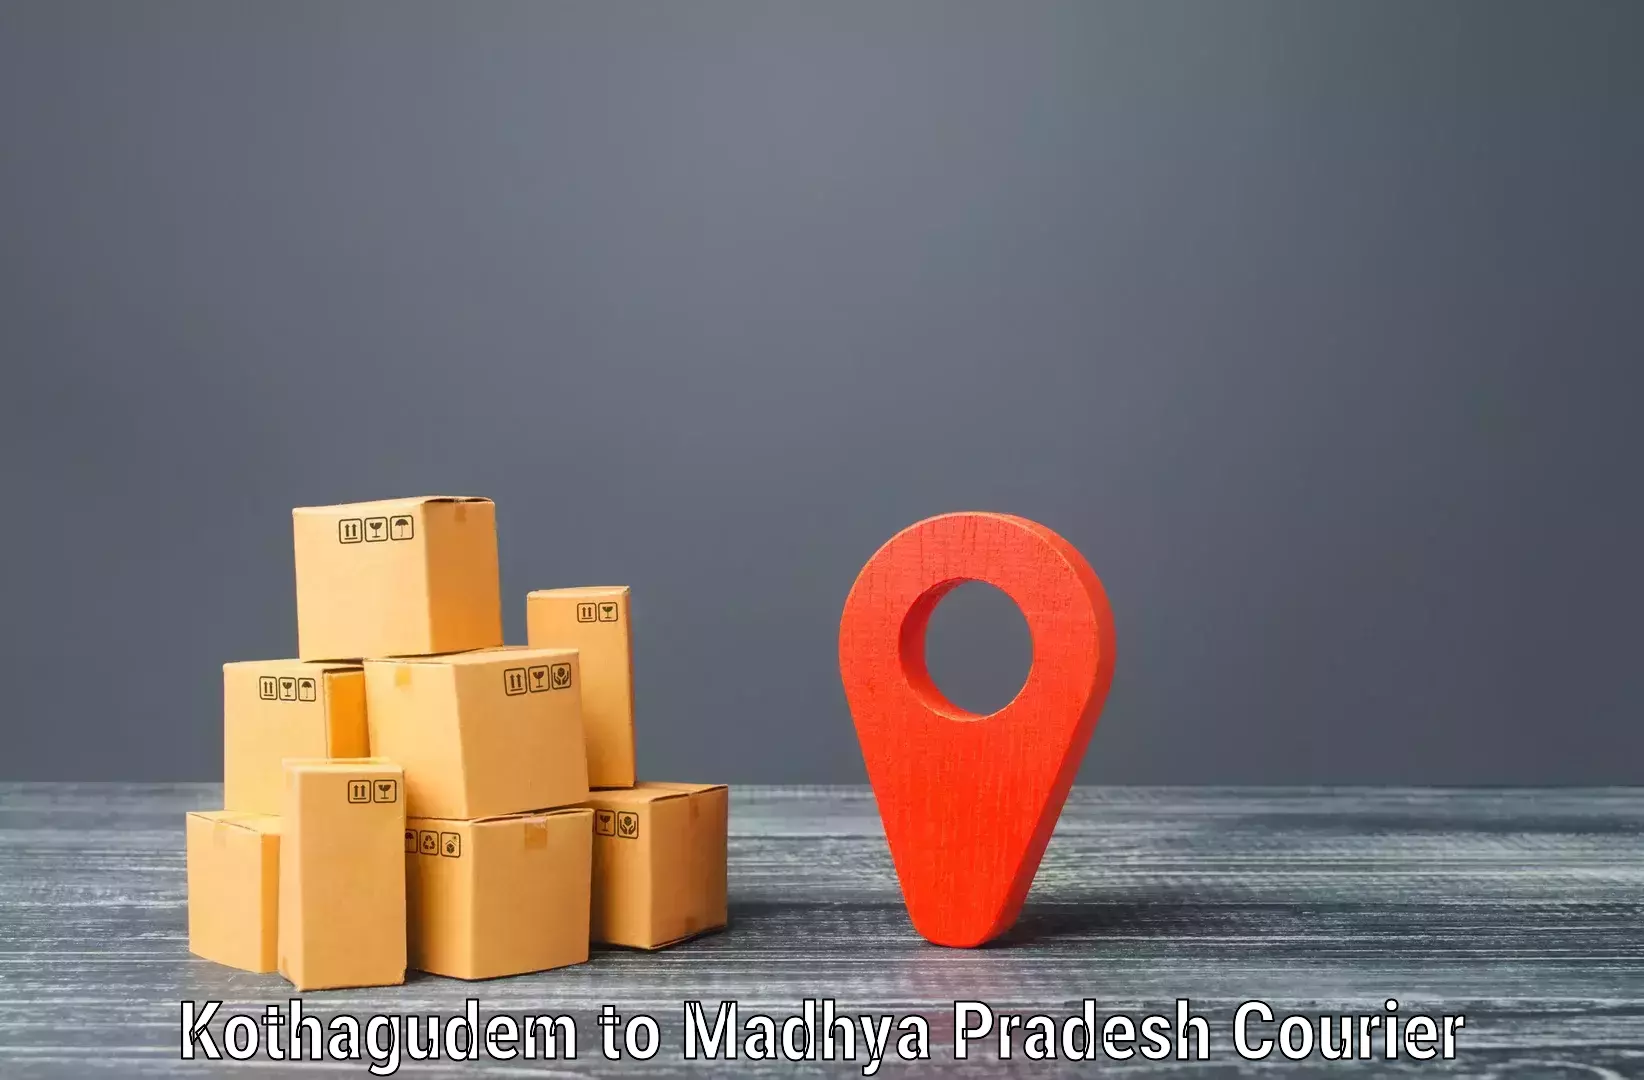 State-of-the-art courier technology Kothagudem to Dewas